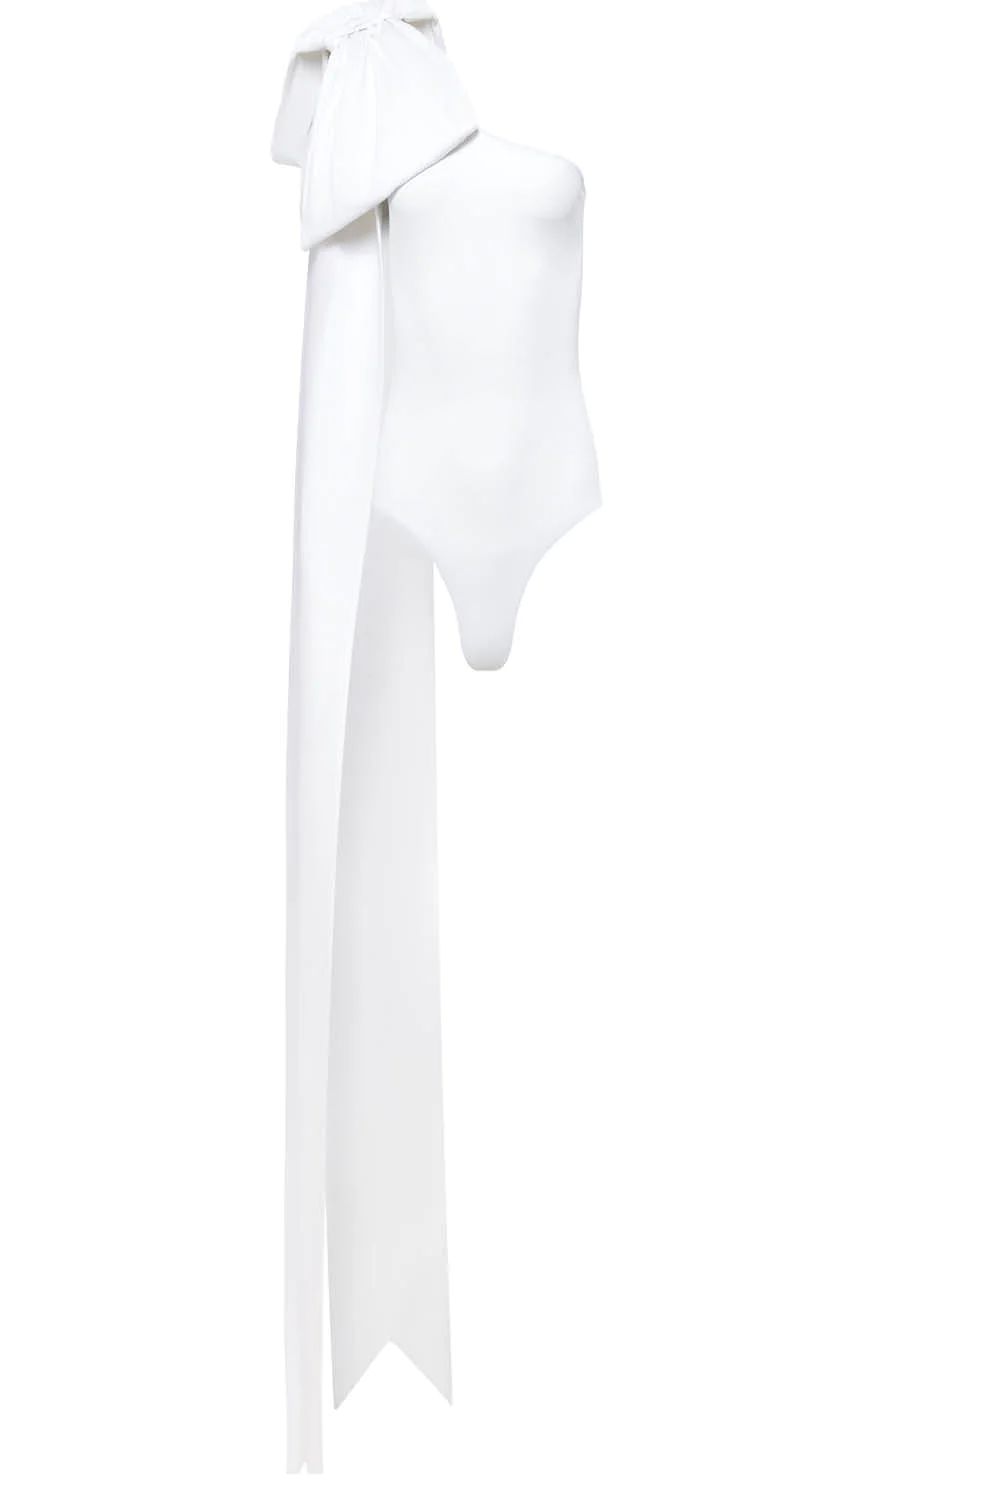 Milly Swimsuit in White with White Bow | MAISON-DE-MODE.COM